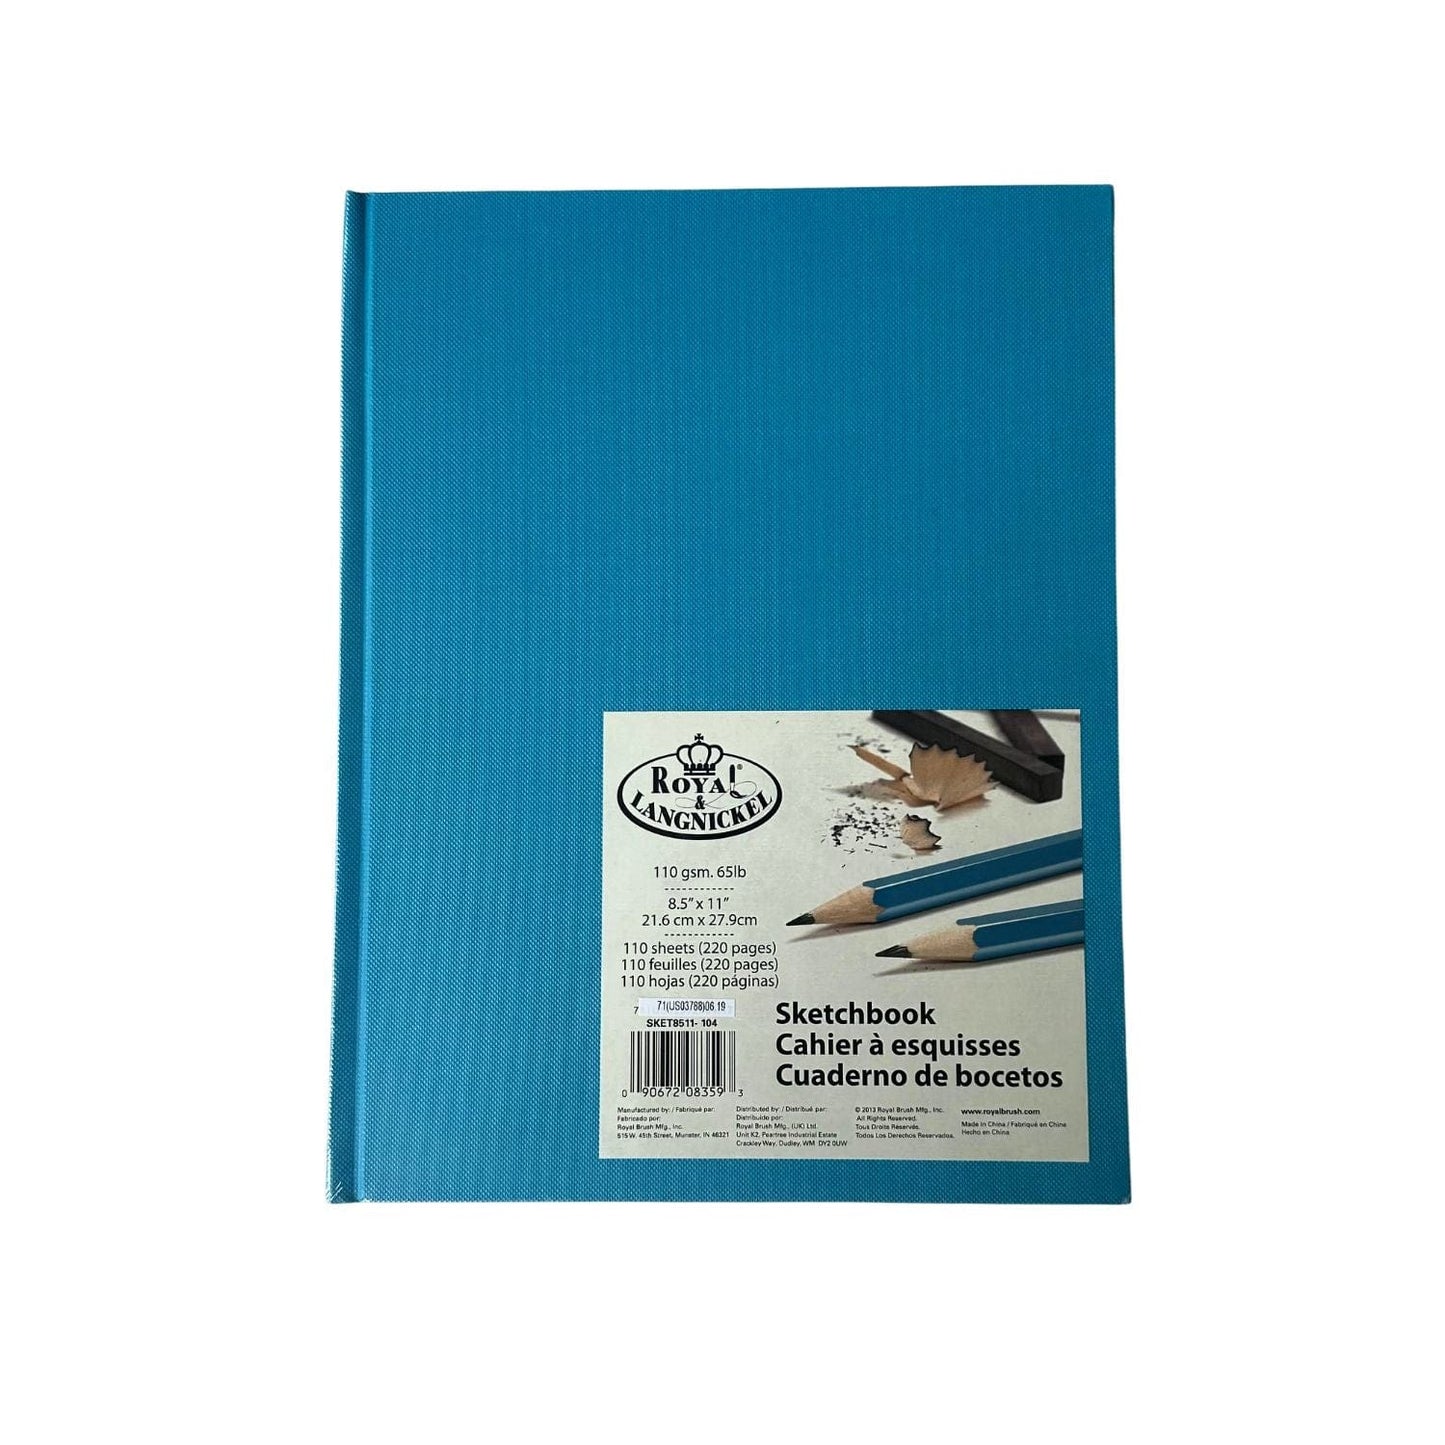 Borden & Riley 234 Paris Paper for Pens Hard Cover Sketch Book 11 in. x 14 in. 40 Sheets